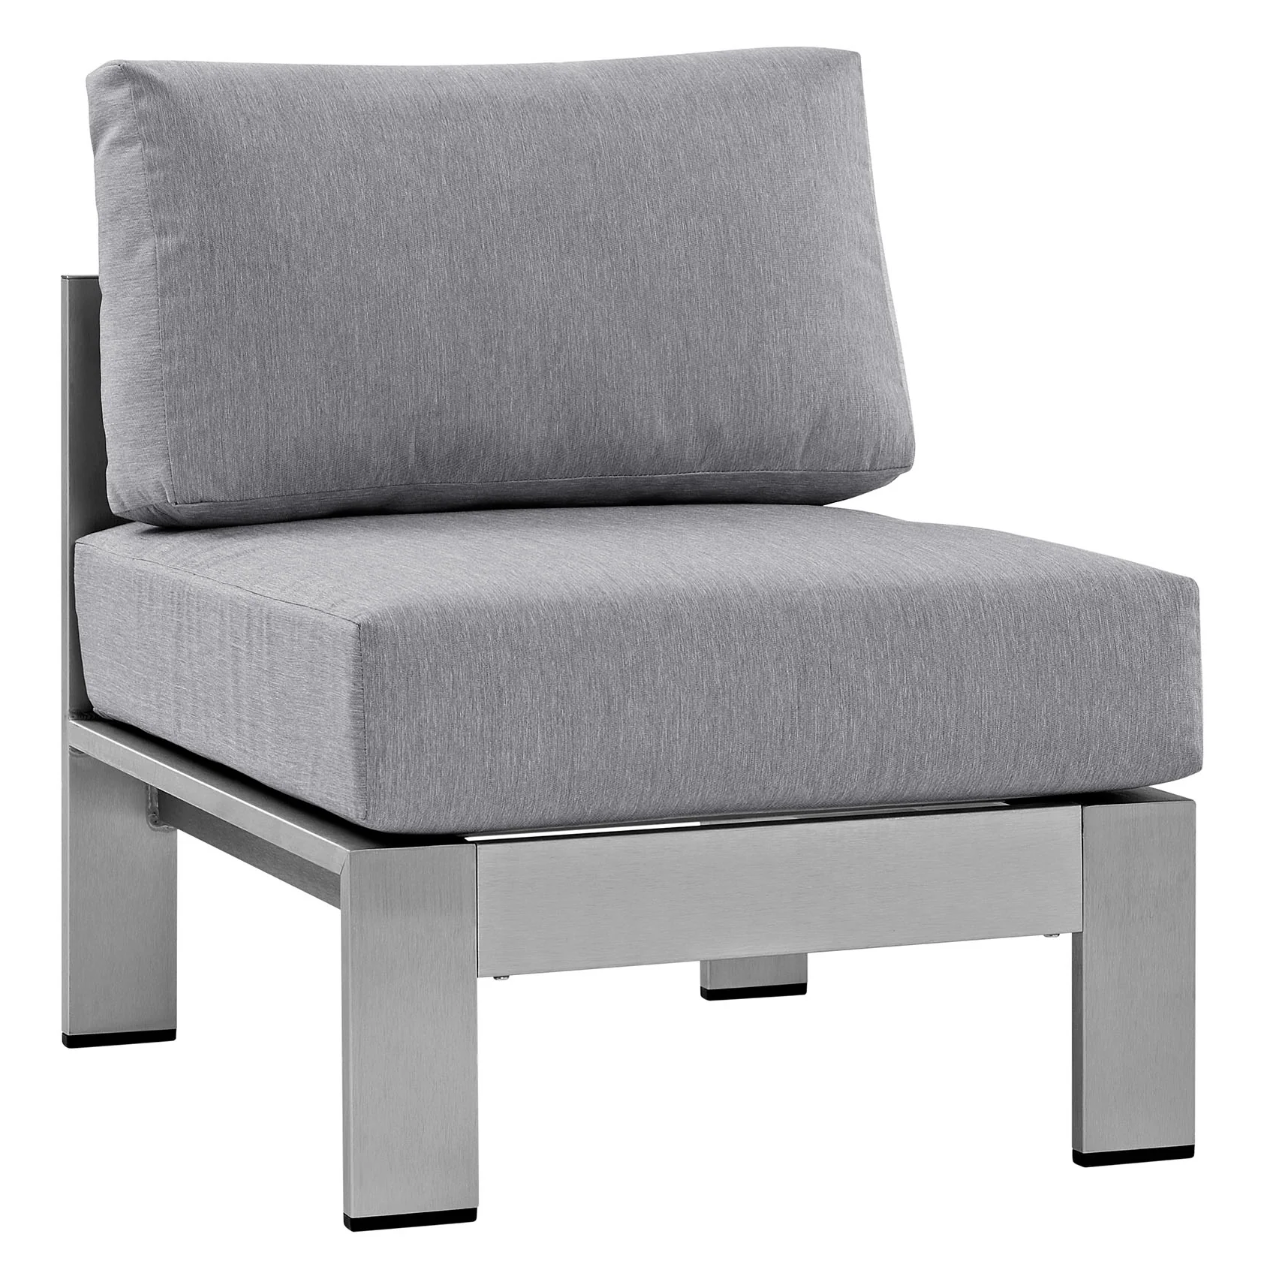 Grey and Silver Aluminum Armless Chair for Sectional Outdoor Sofa